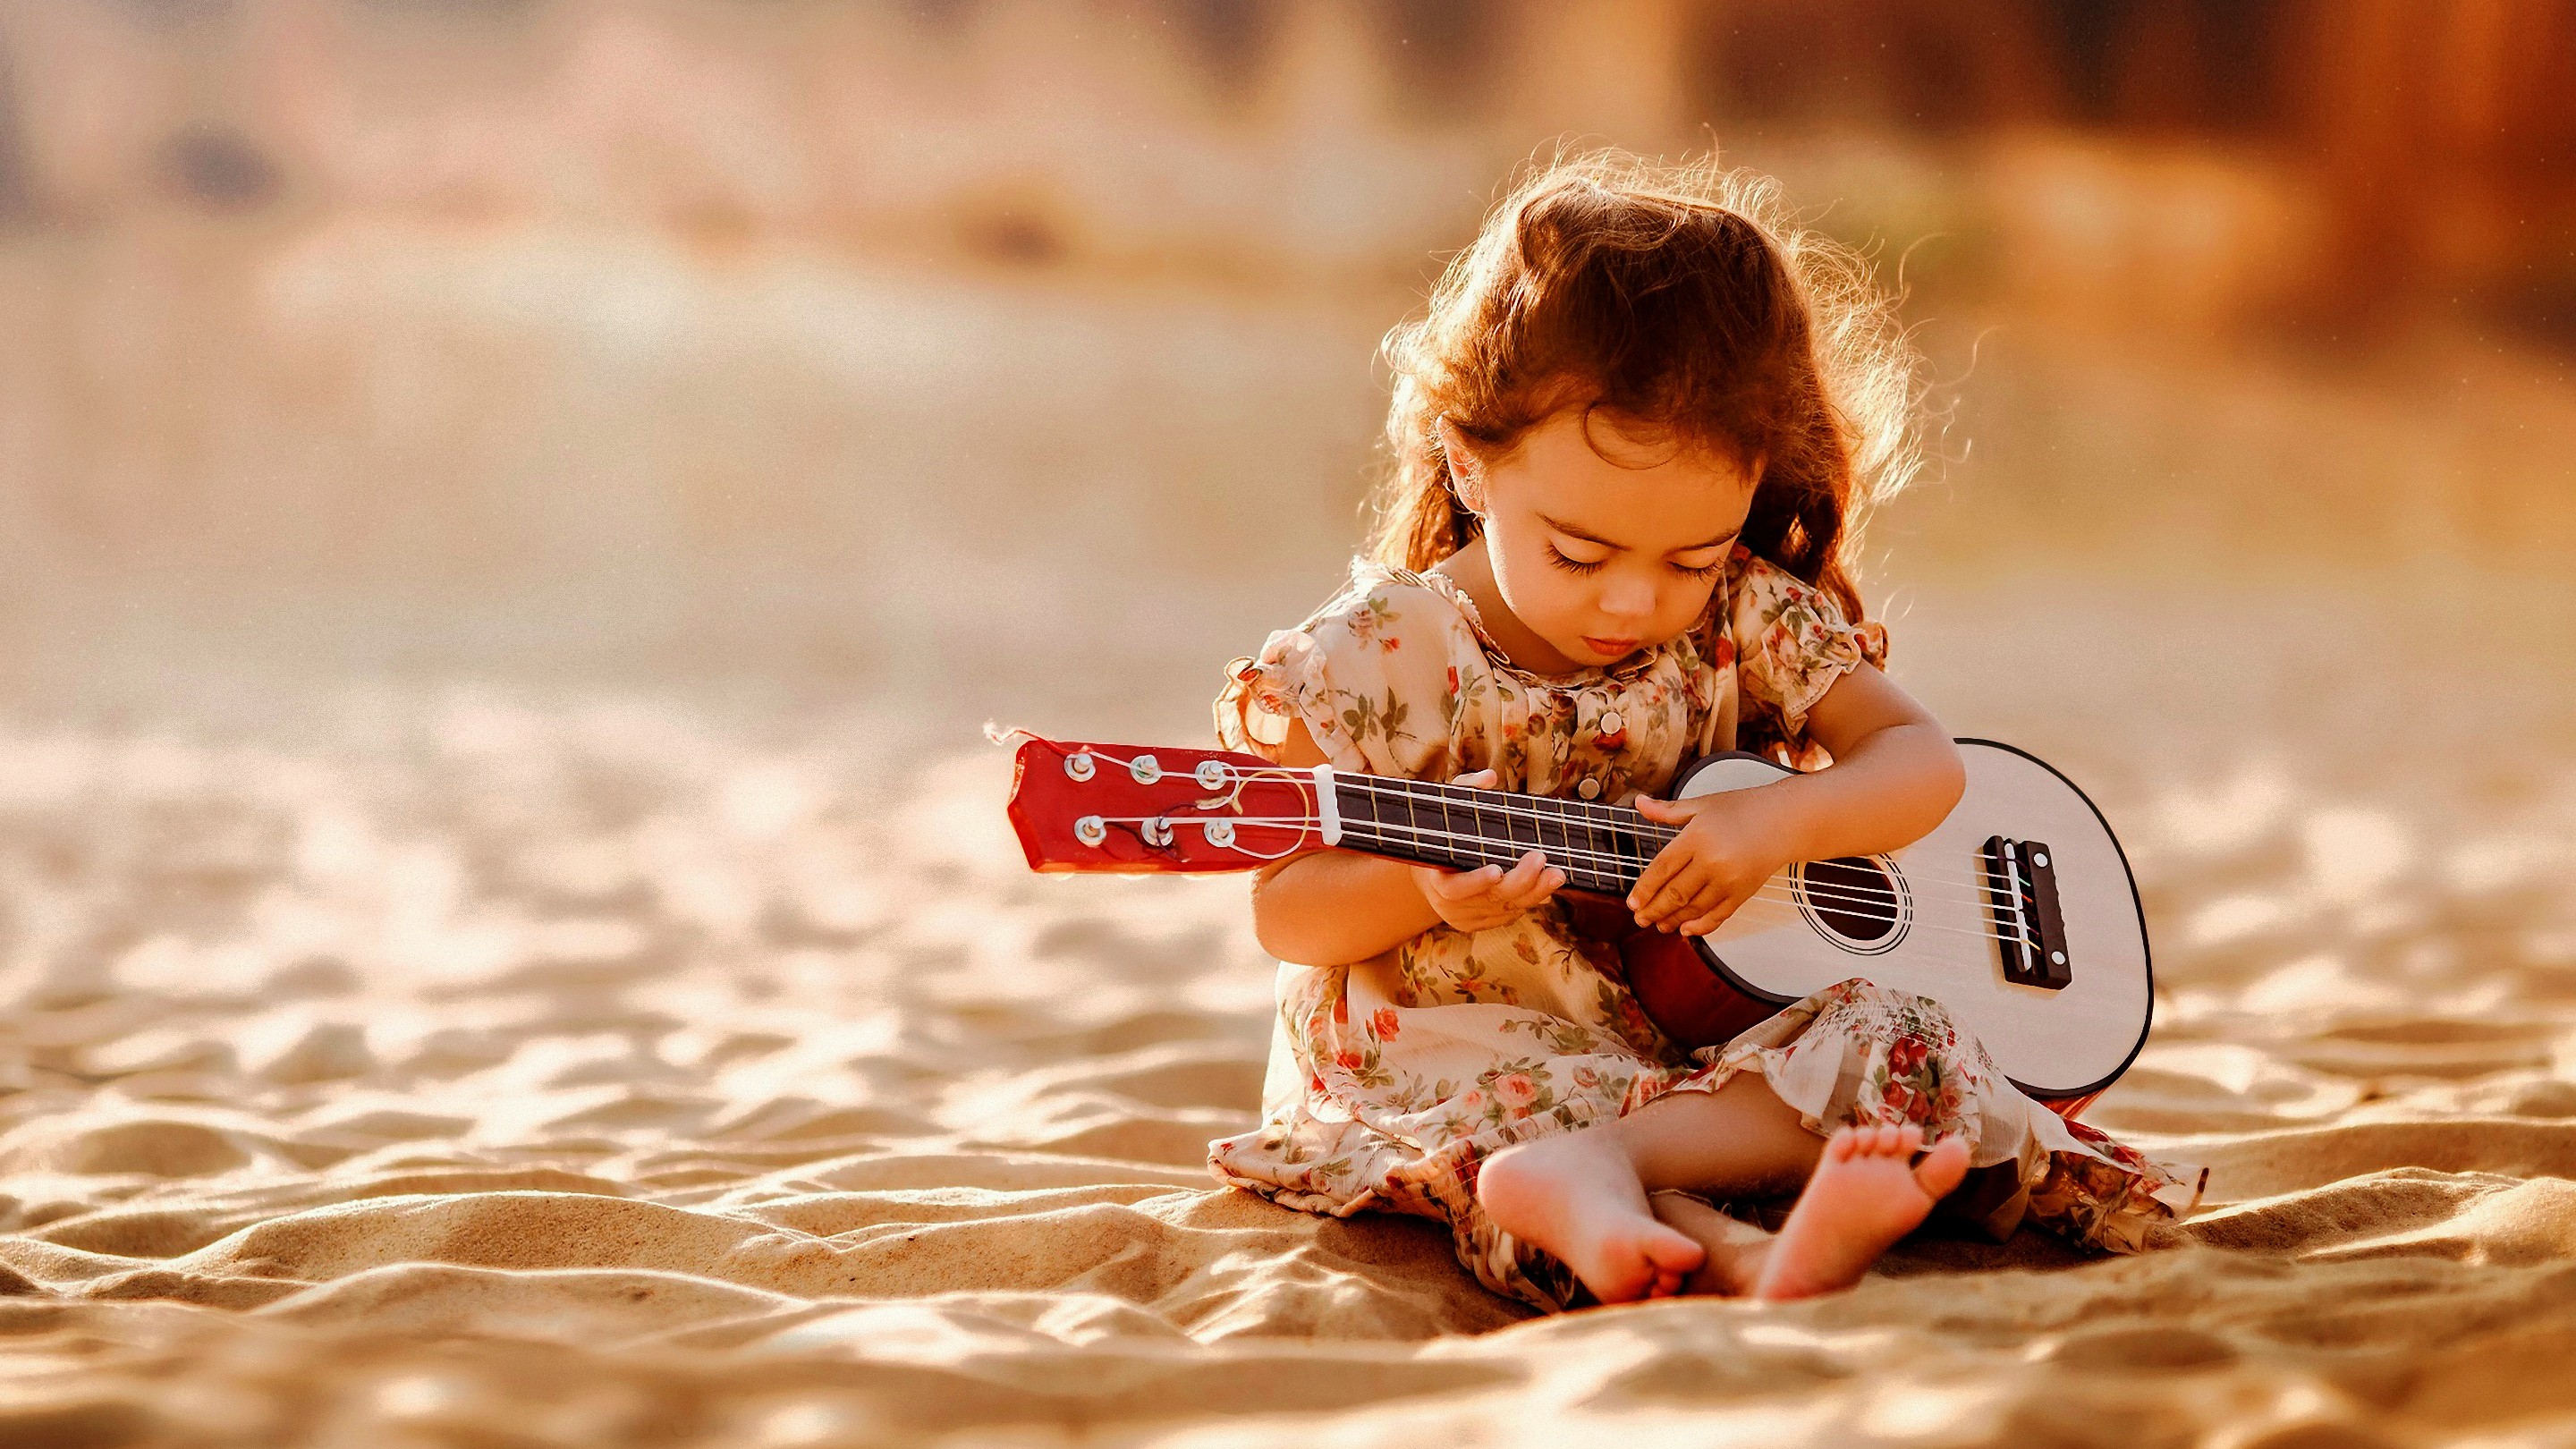 People 2880x1620 children photography guitar musical instrument